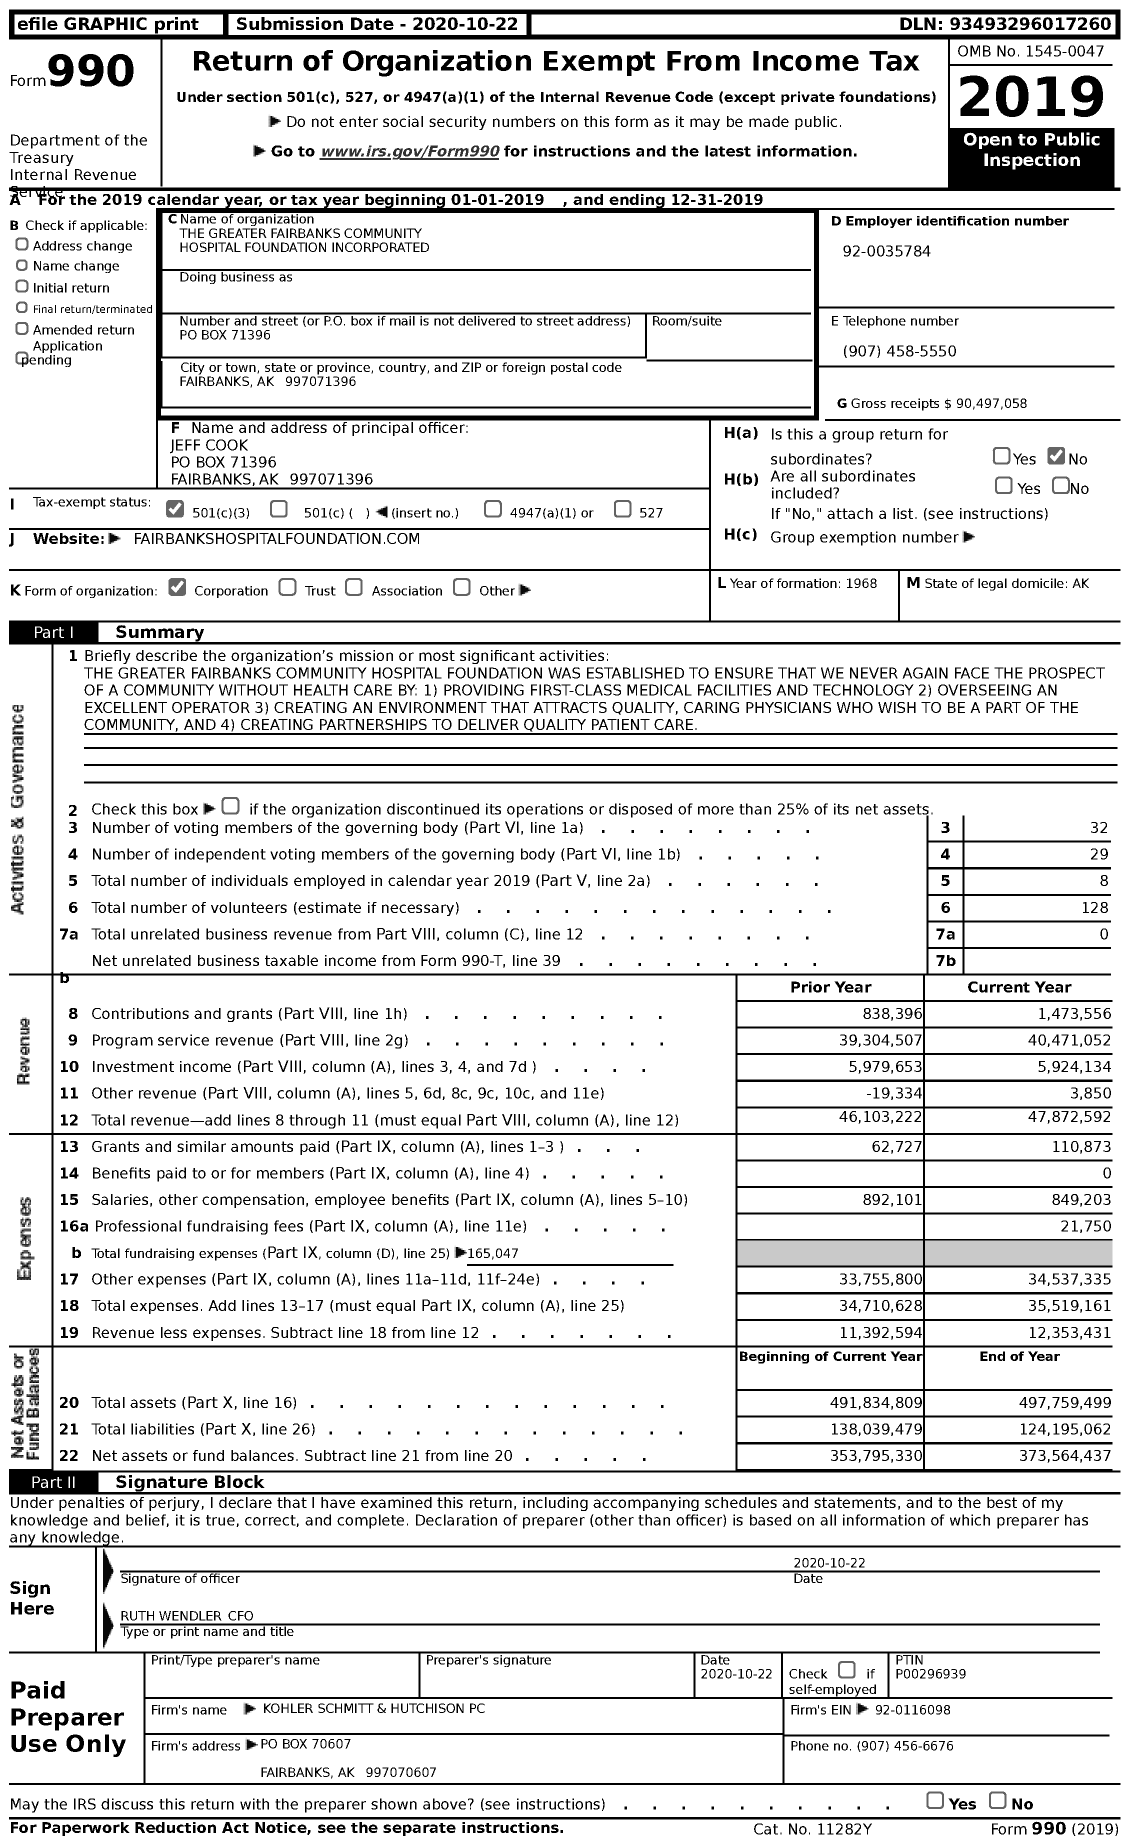 Image of first page of 2019 Form 990 for The Greater Fairbanks Community Hospital Foundation Incorporated